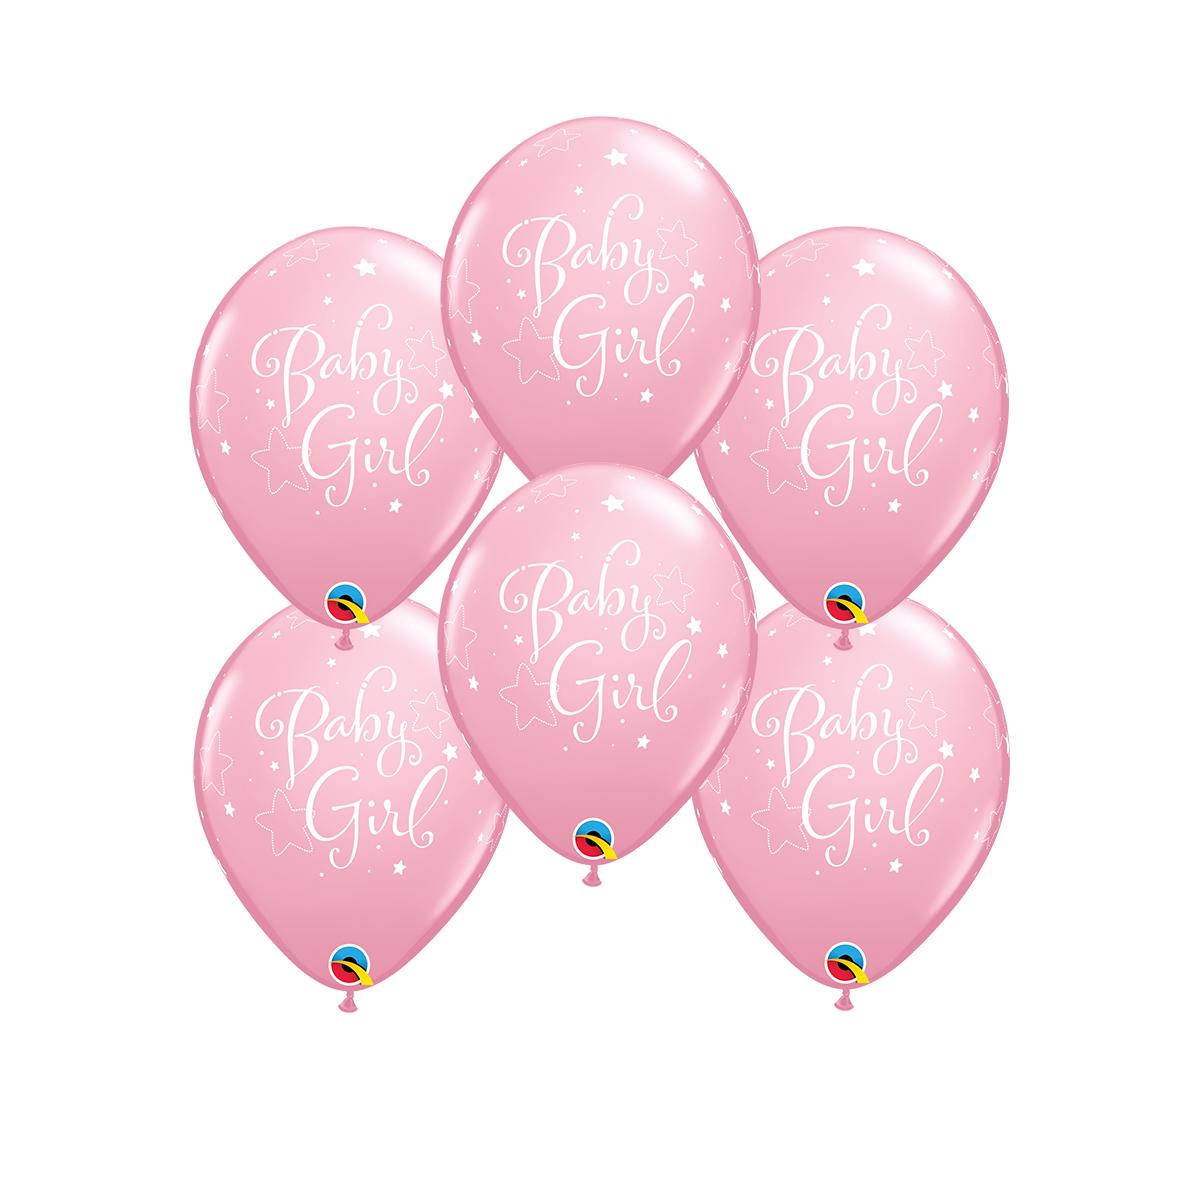 Image Of 6 Inflated Baby Girl Latex Balloons